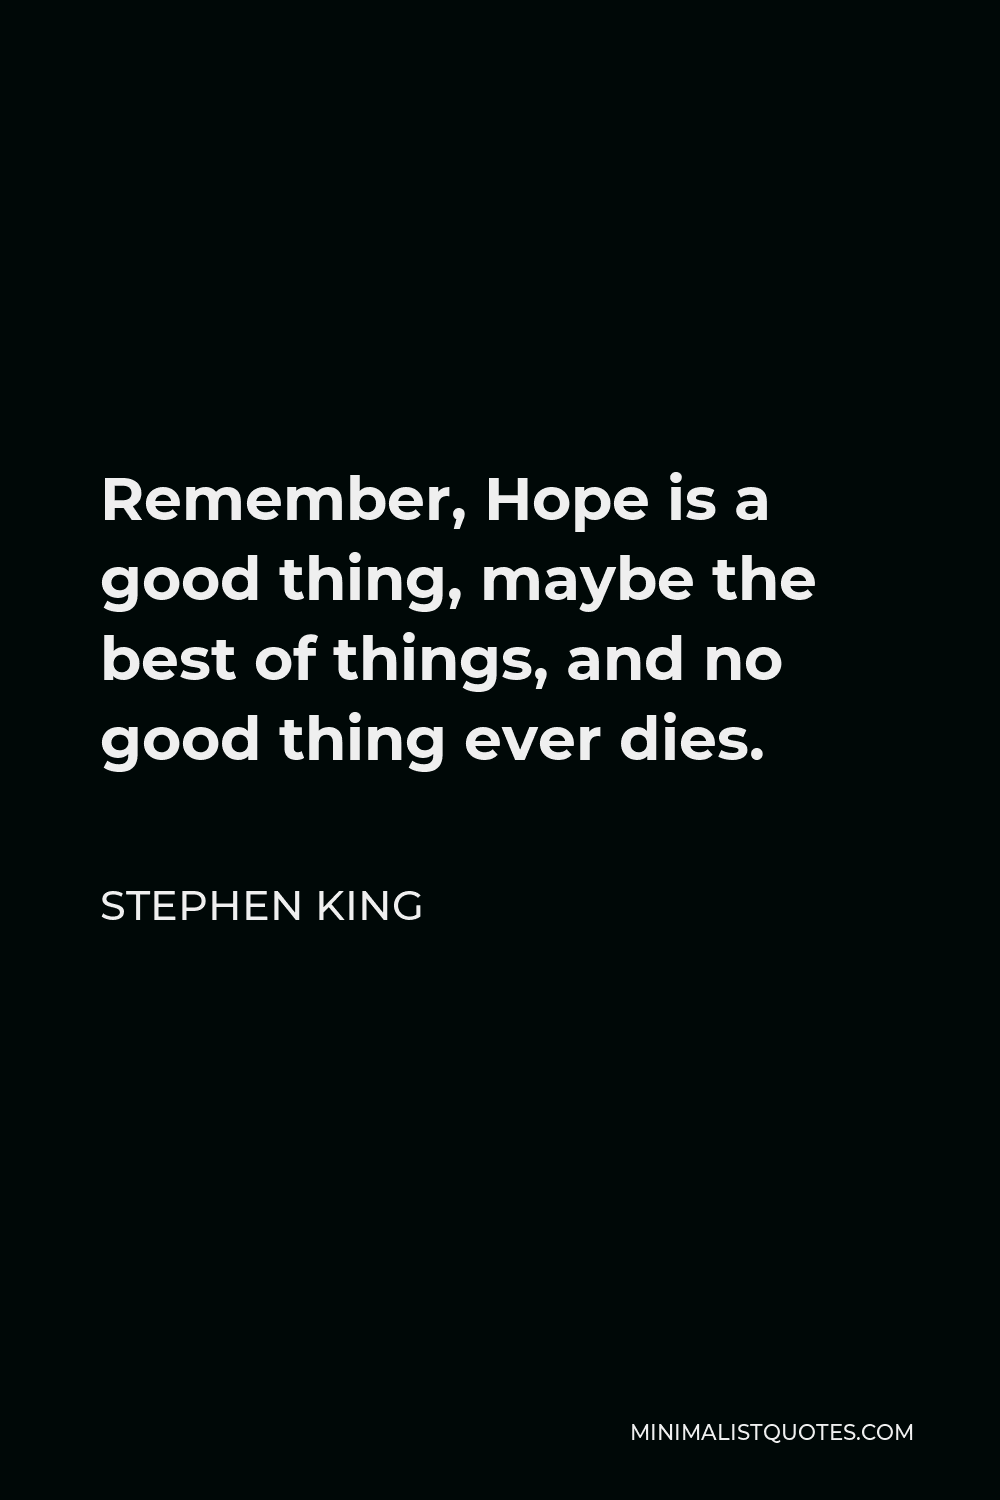 Stephen King Quote - Remember, Hope is a good thing, maybe the best of things, and no good thing ever dies.